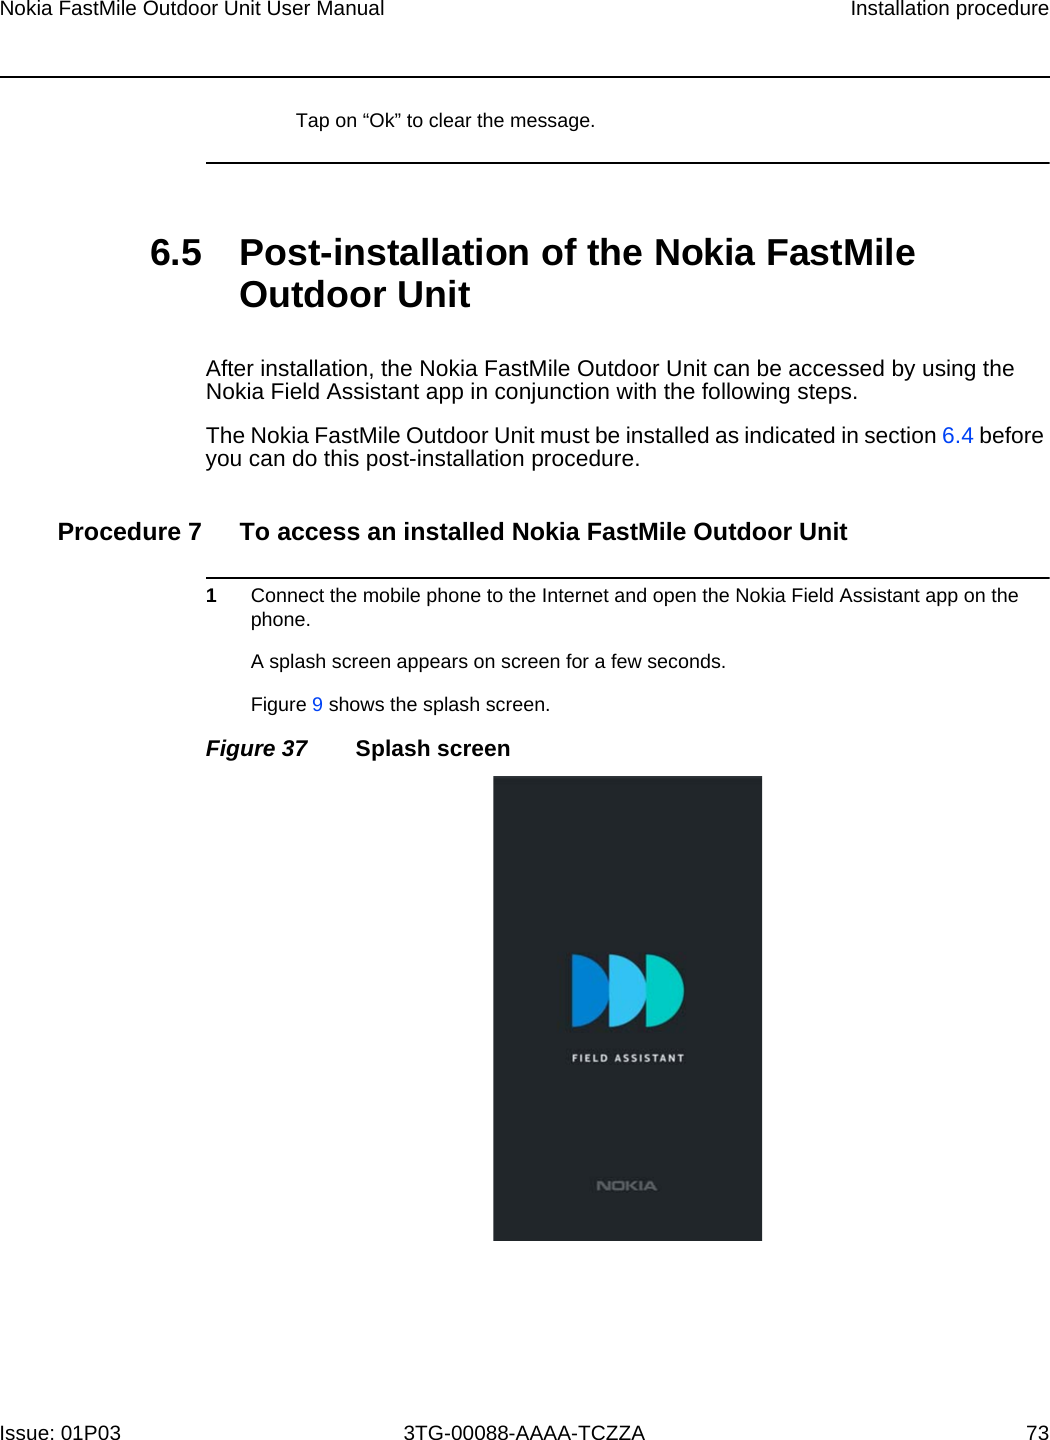 Page 68 of Nokia Bell 34003800FM20 FastMile Compact User Manual Nokia FastMile Outdoor Unit